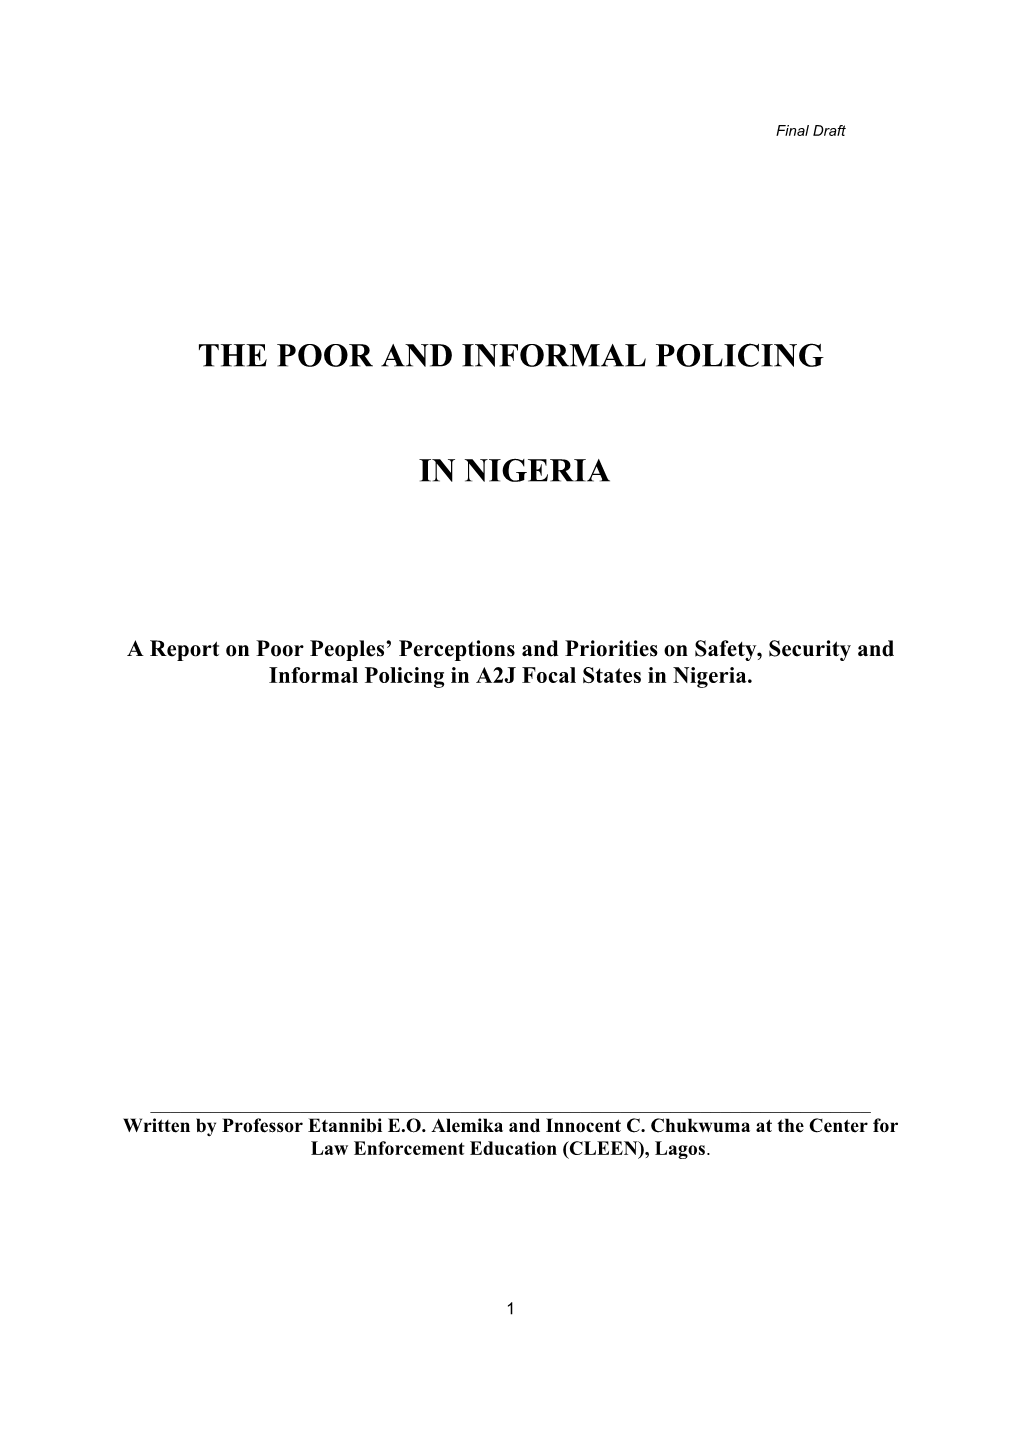 The Poor and Informal Policing in Nigeria